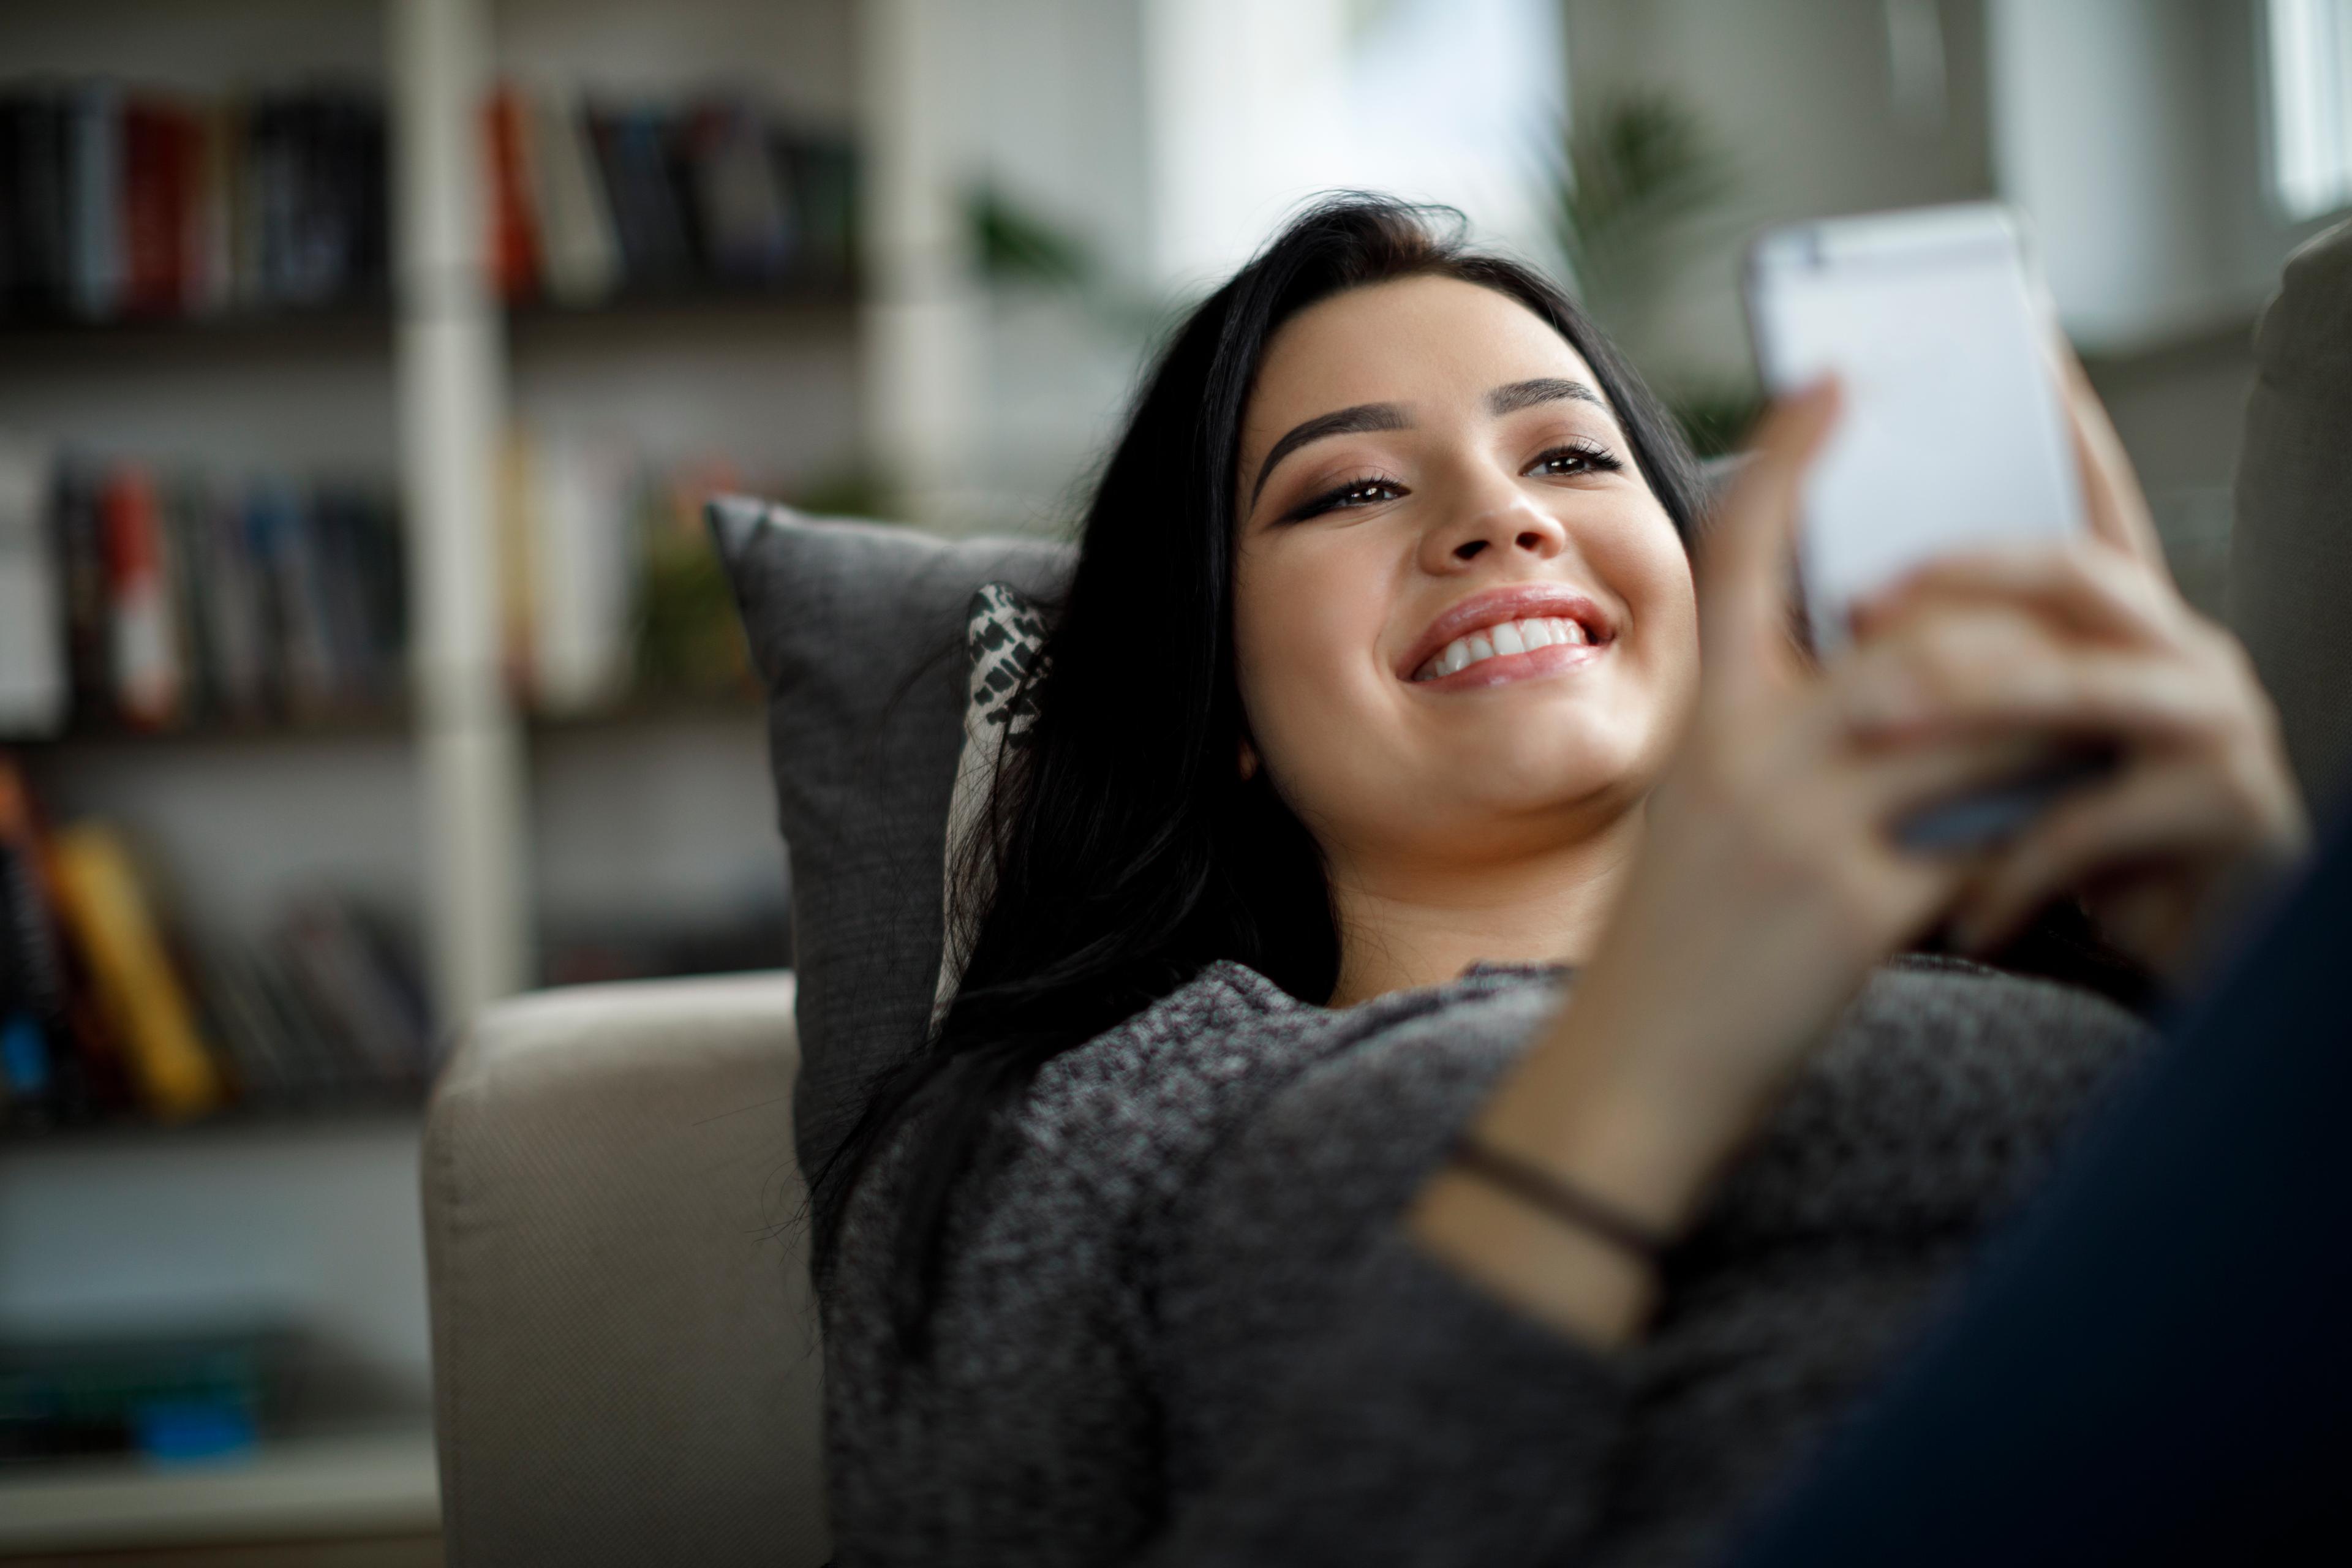 a woman lying down on a sofa smiling while on her phone